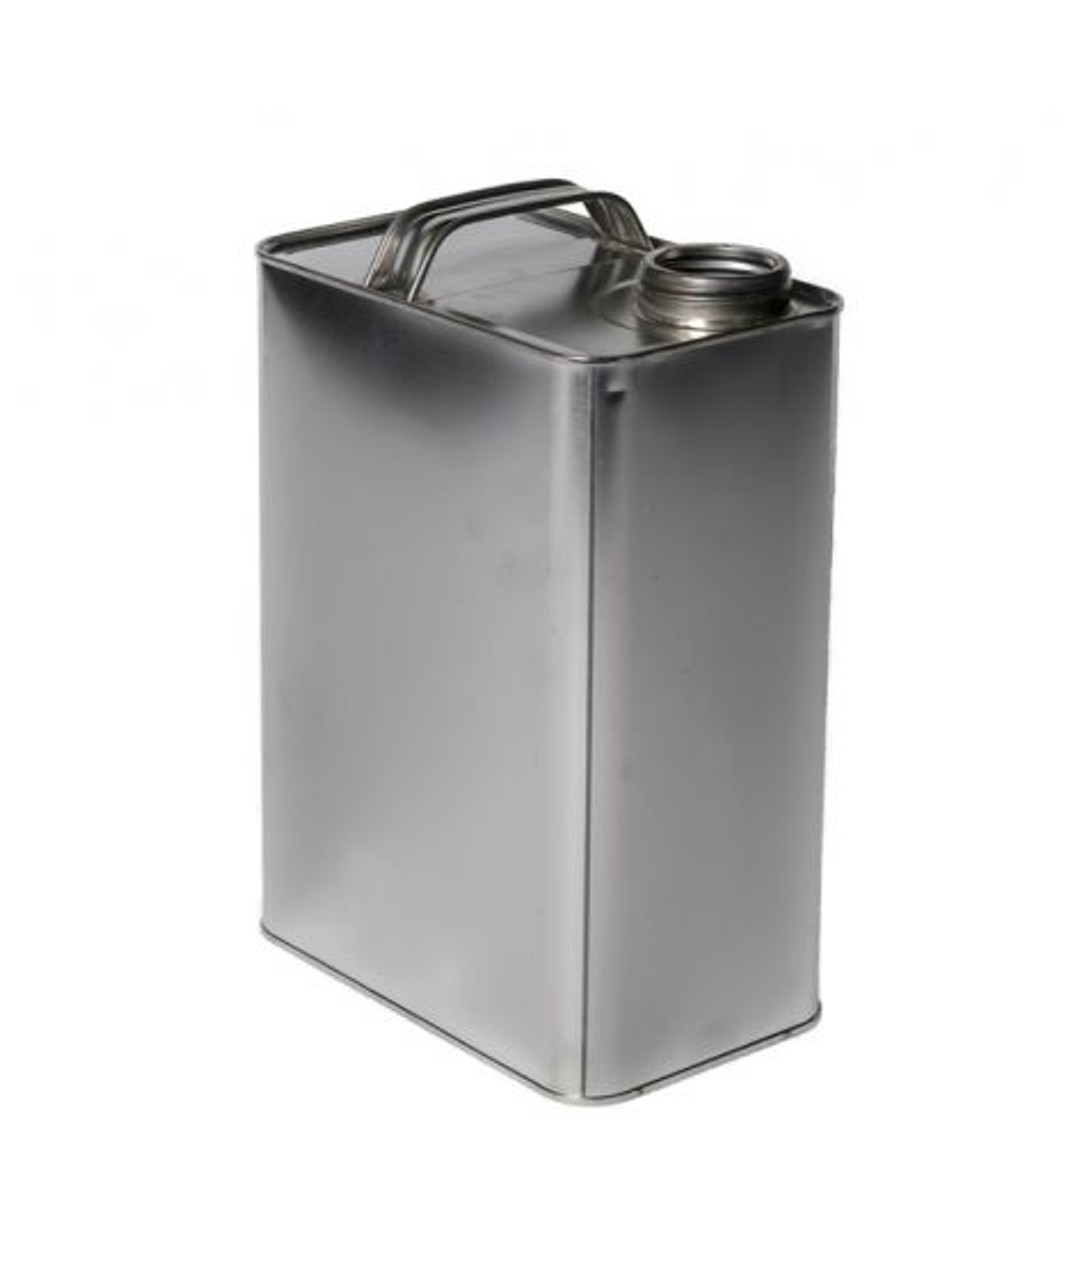 1 GALLON F-STYLE OBLONG METAL CAN WITH 1 1/4 INCH ALPHA OPENING